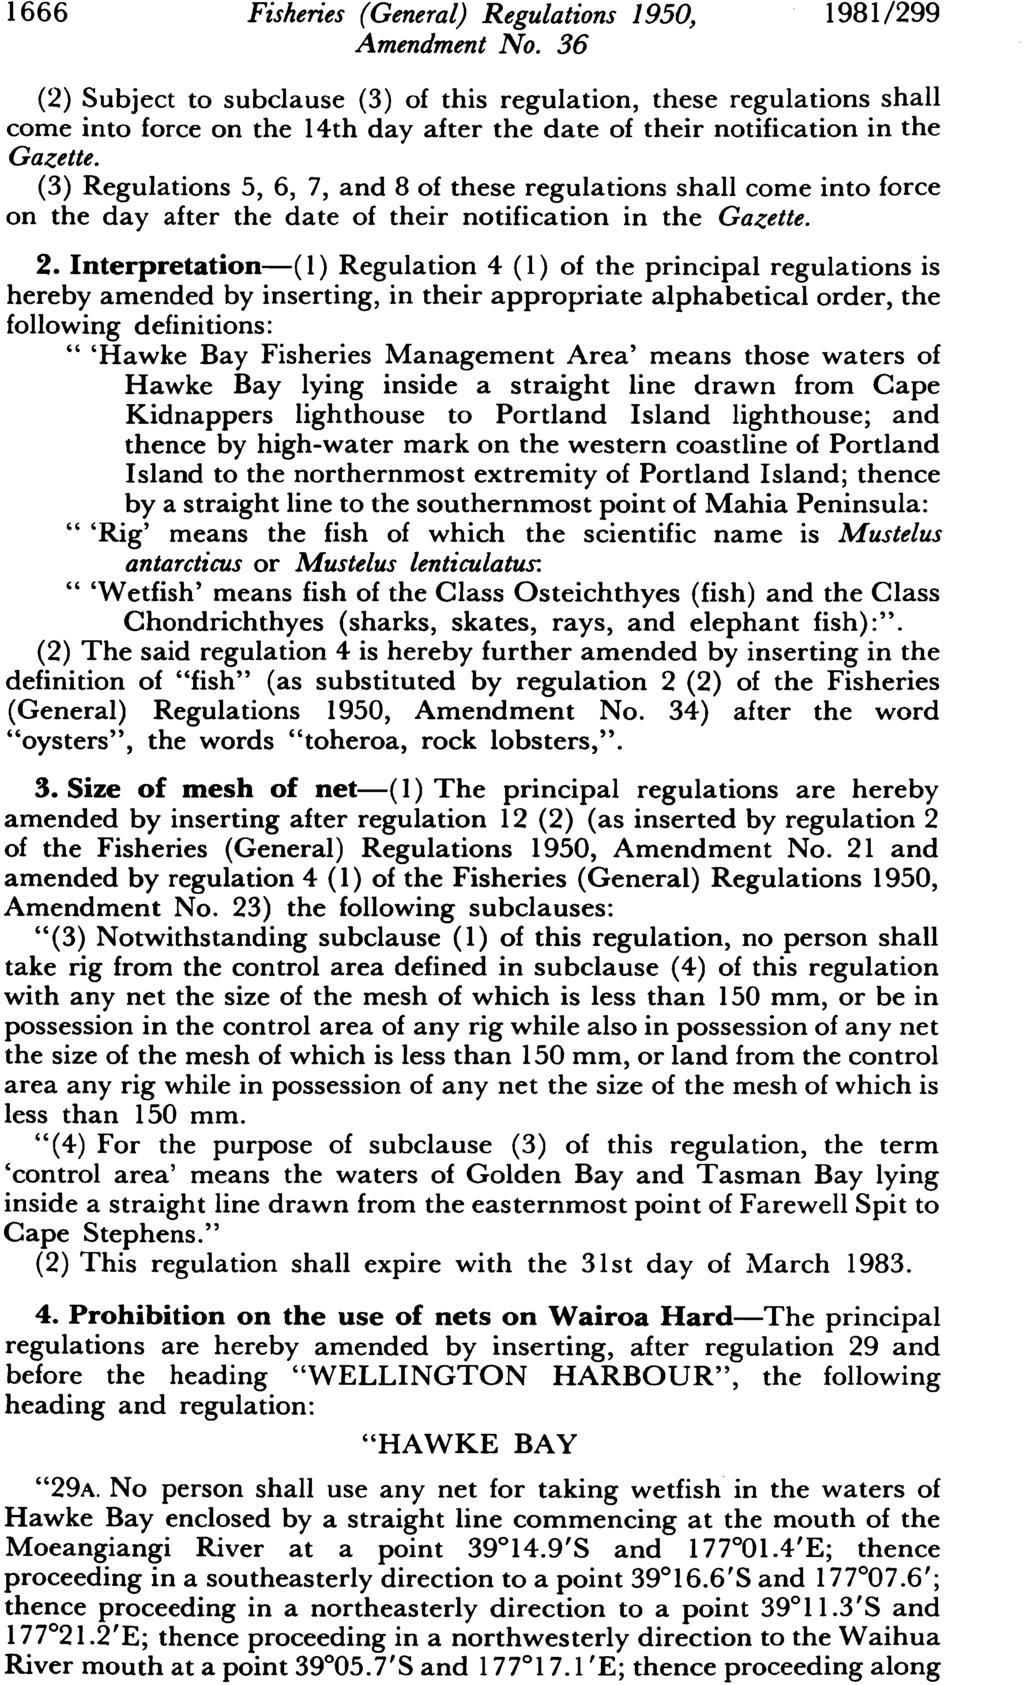 1666 Fisheries (General) Regulations 1950, (2) Subject to subclause (3) of this regulation, these regulations shall come into force on the 14th day after the date of their notification in the Gazette.